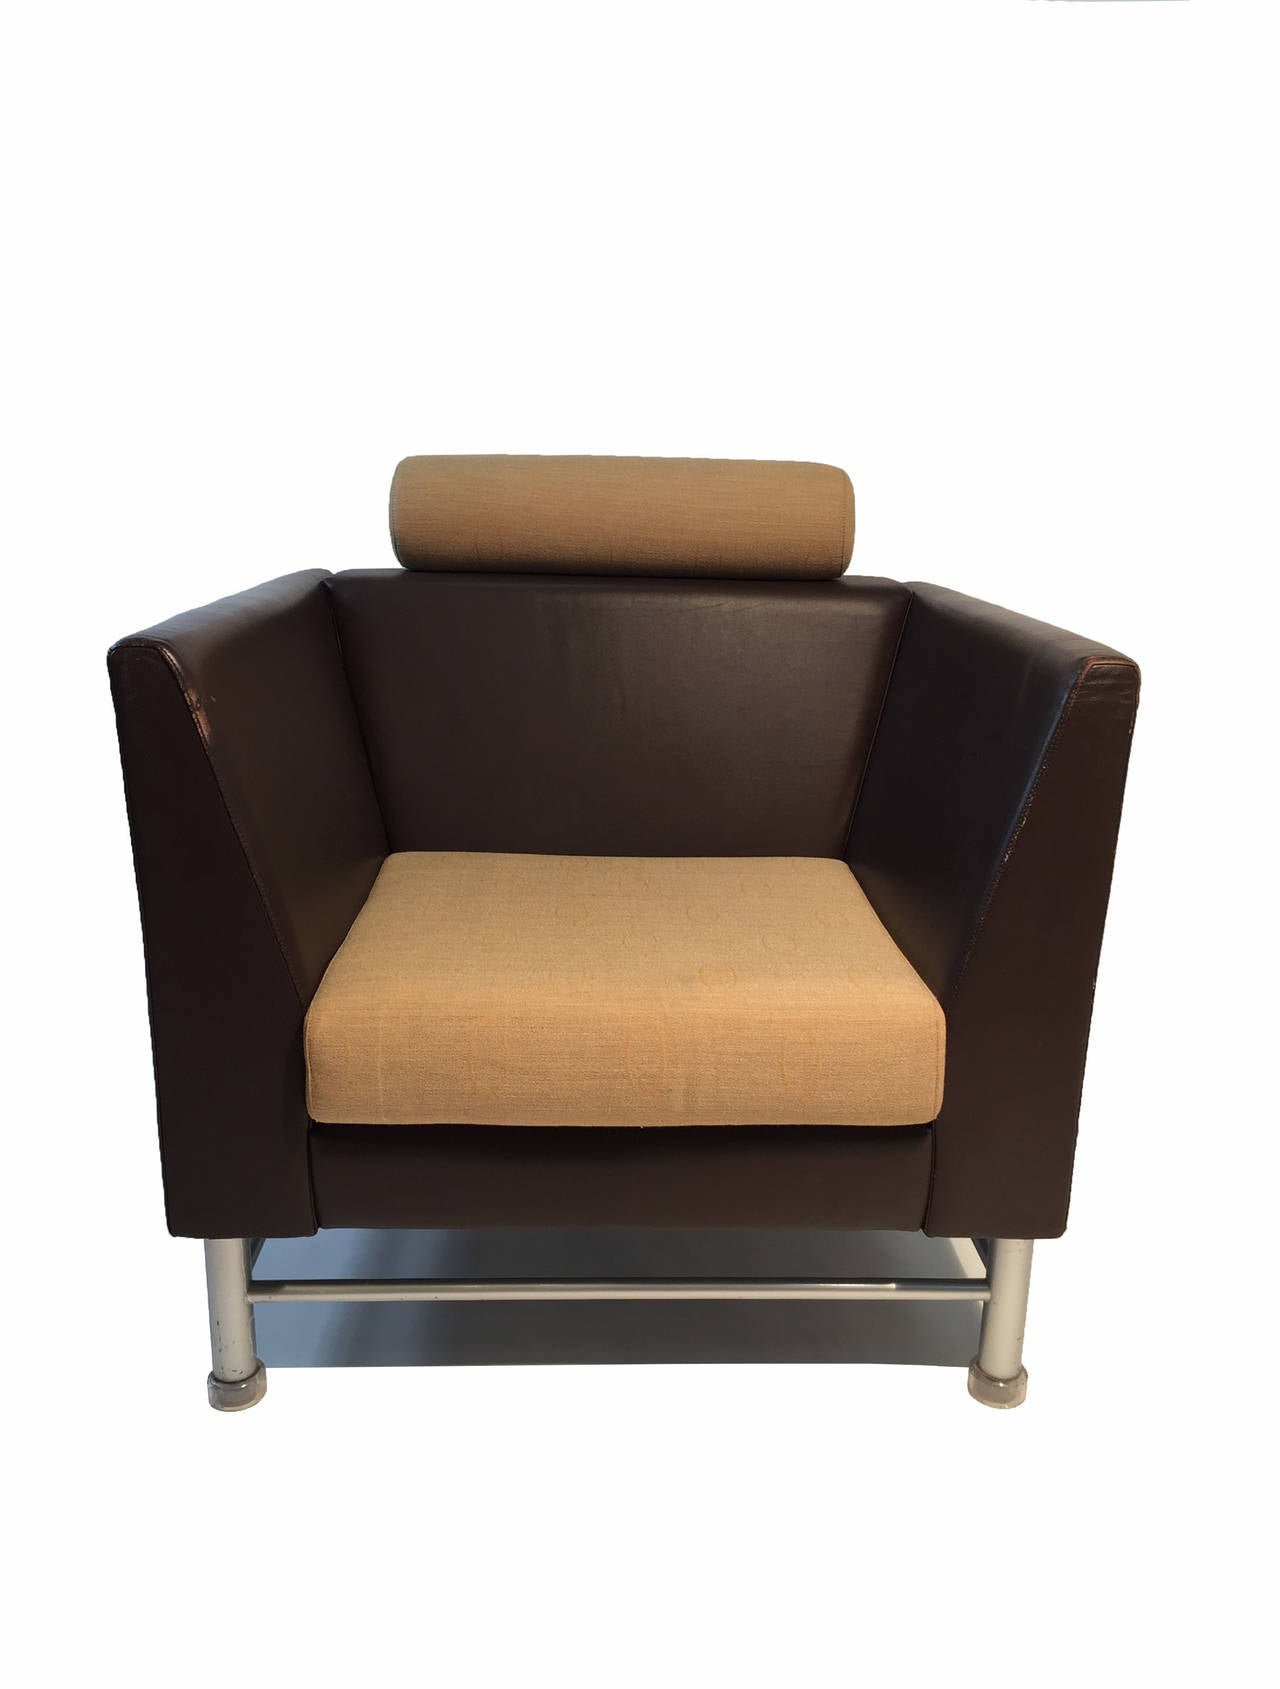 A brown leather and tan fabric lounge chair for Knoll from the prolific Italian architect/designer Ettore Sottsass.